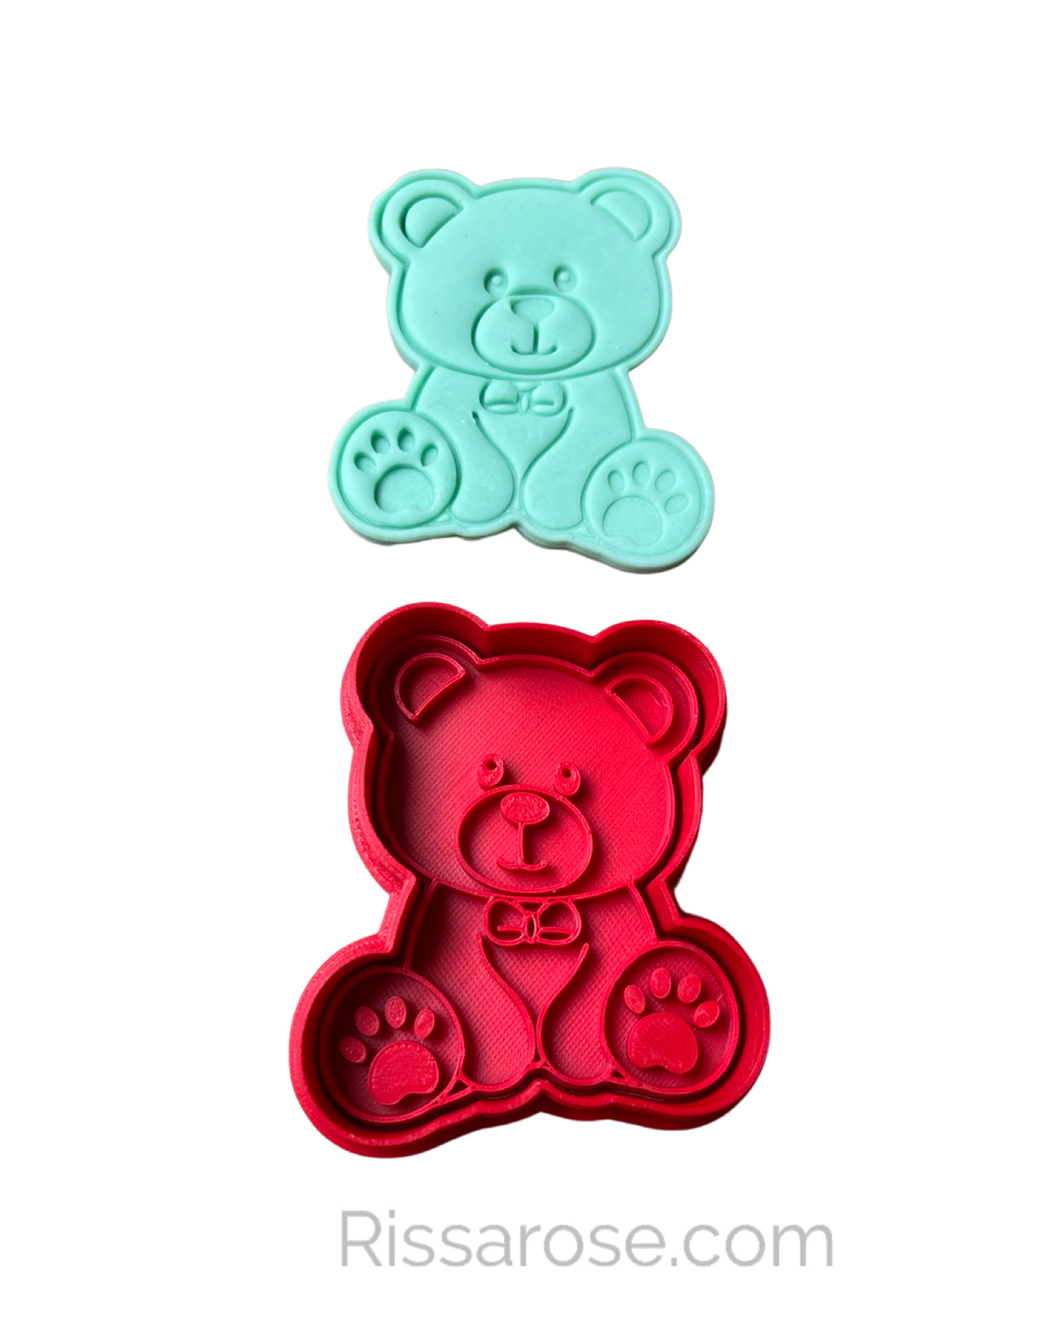 Baby bear cookie cutter boy girl bow tie Baby shower